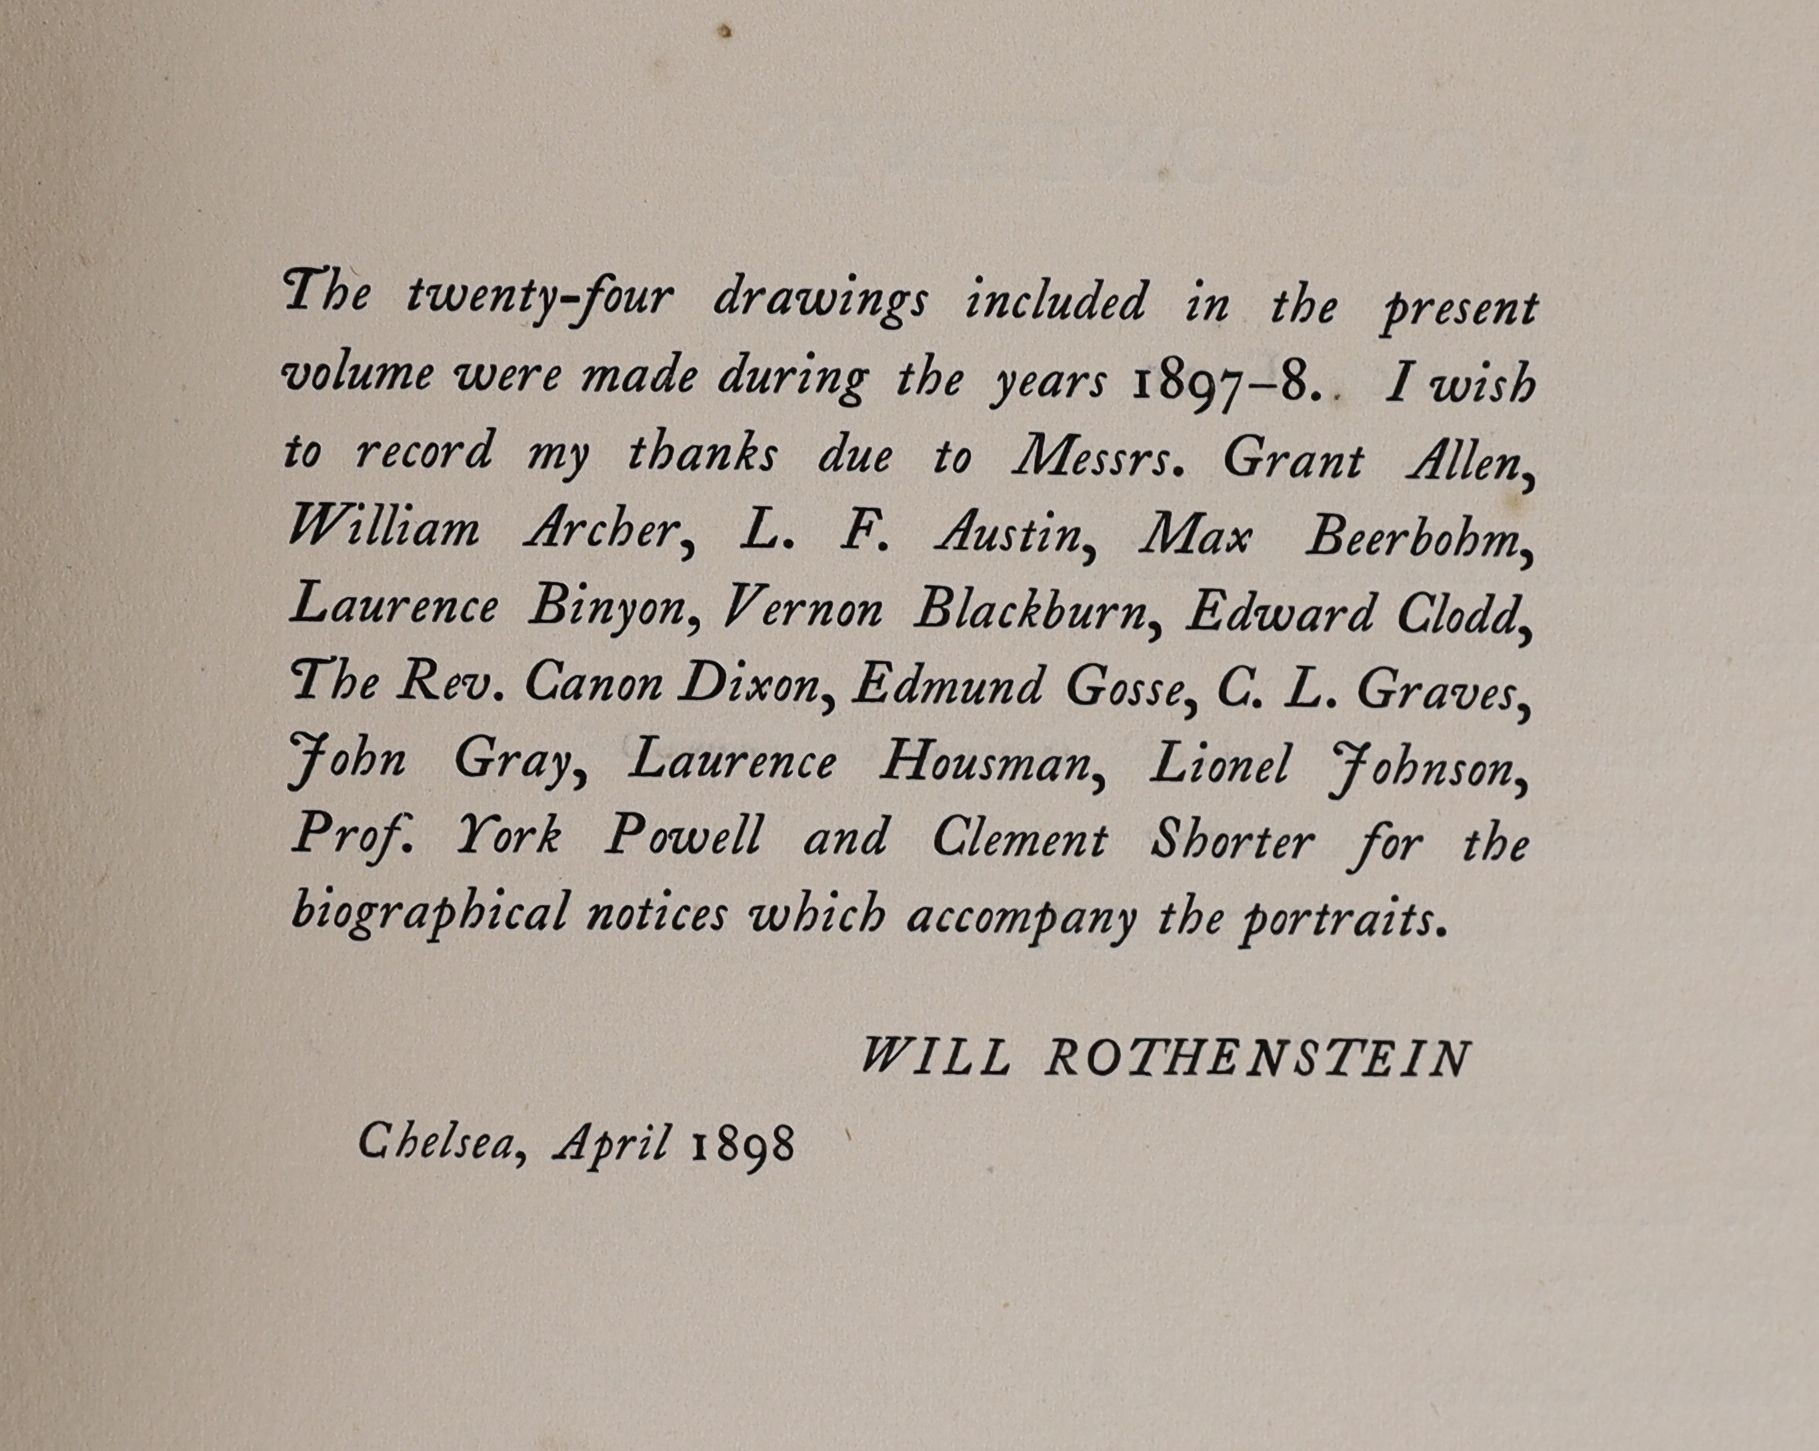 Rothenstein, William - English Portraits, a series of Lithographed Drawings - limited ed. one of 750. Complete with 24 illustrated plates, limitation and dedication page. Cloth with gilt letters direct on upper and spine